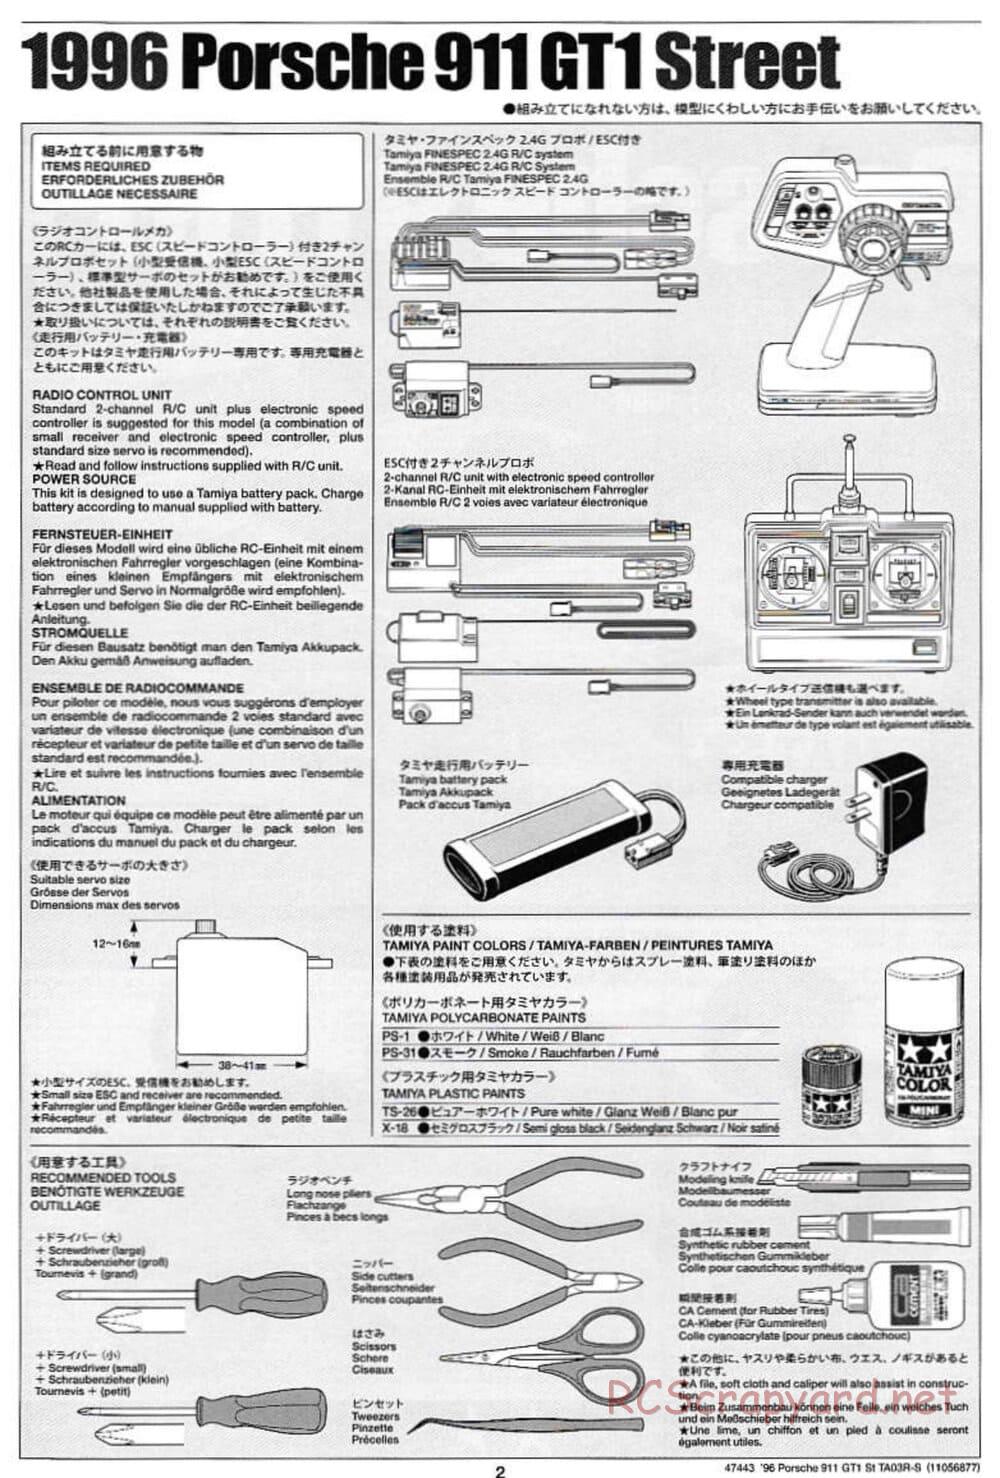 Tamiya - Porsche 911 GT1 Street - TA-03RS Chassis - Manual - Page 2